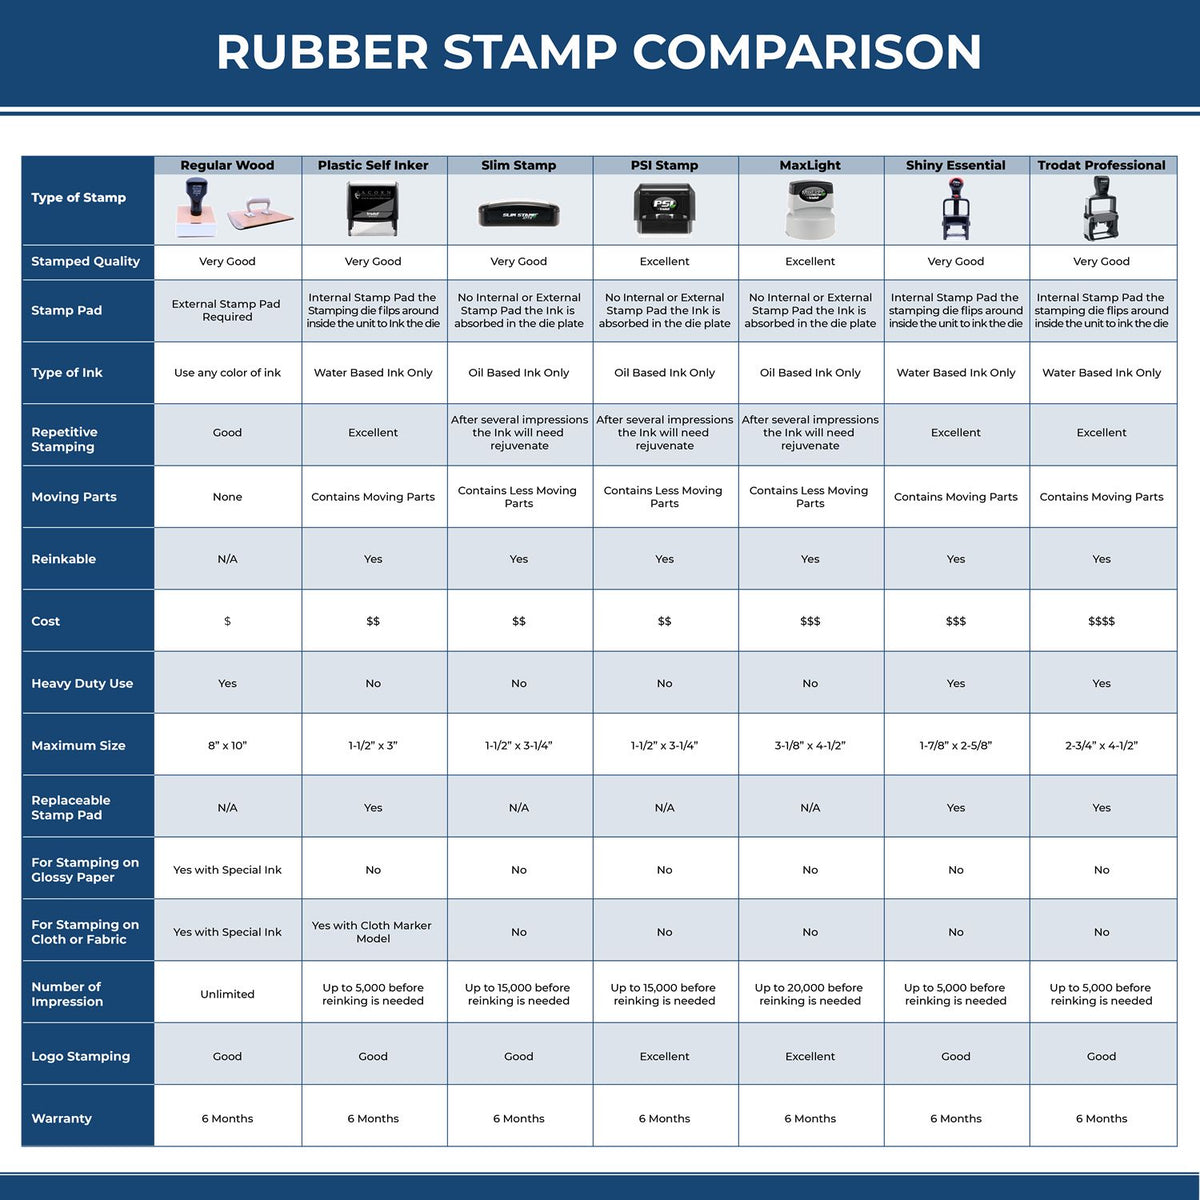 A comparison chart for the different types of mount models available for the Super Slim Mississippi Notary Public Stamp.